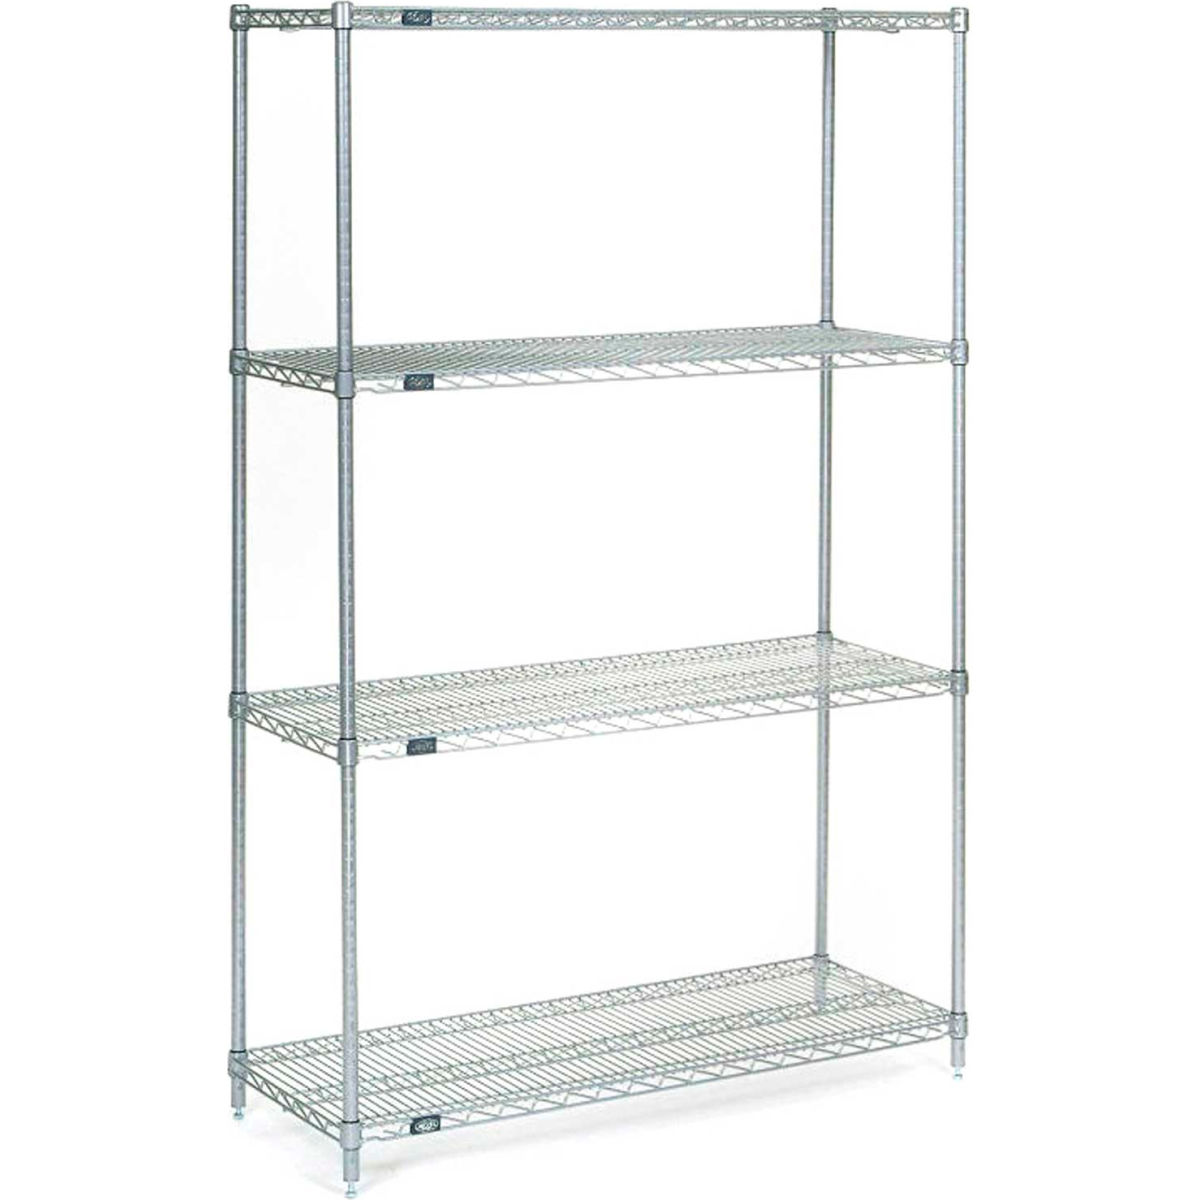 Picture of Global Industrial 14248S 86 x 24 x 14 in. Nexel Stainless Steel Starter Wire Shelving